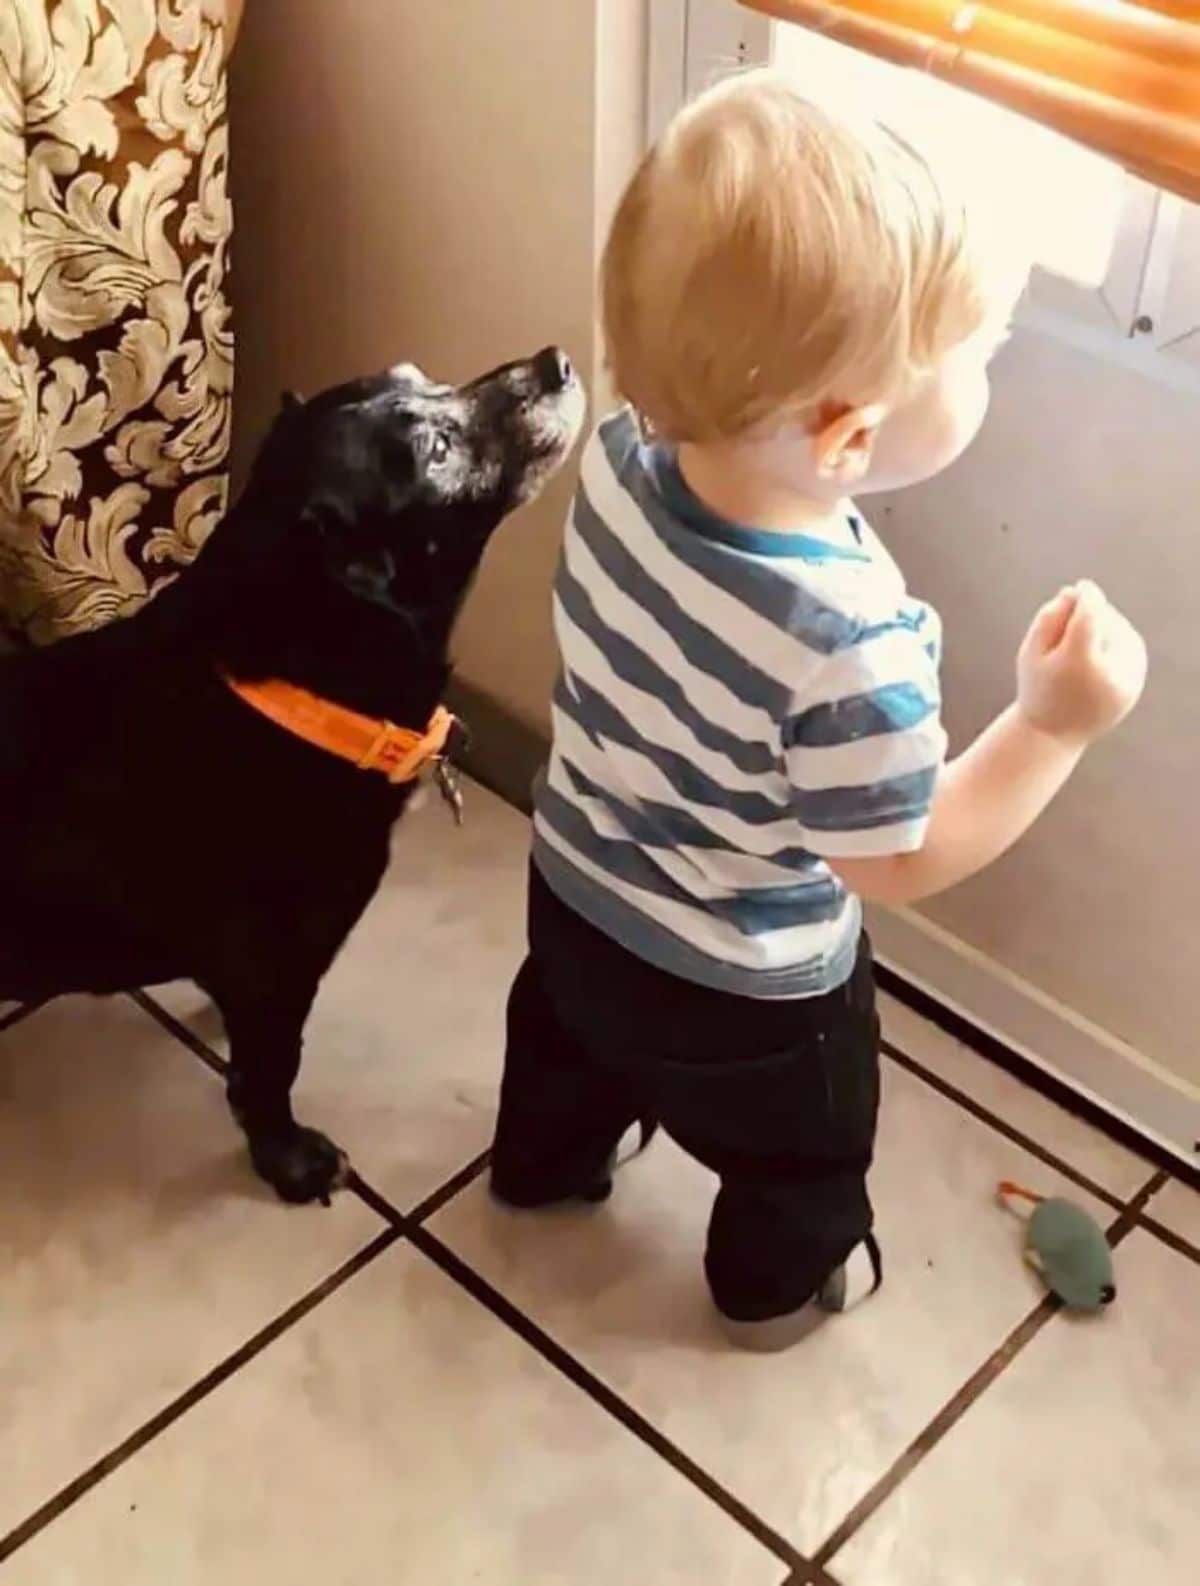 little boy standing at a window looking out next to a an old black dog with an orange collar